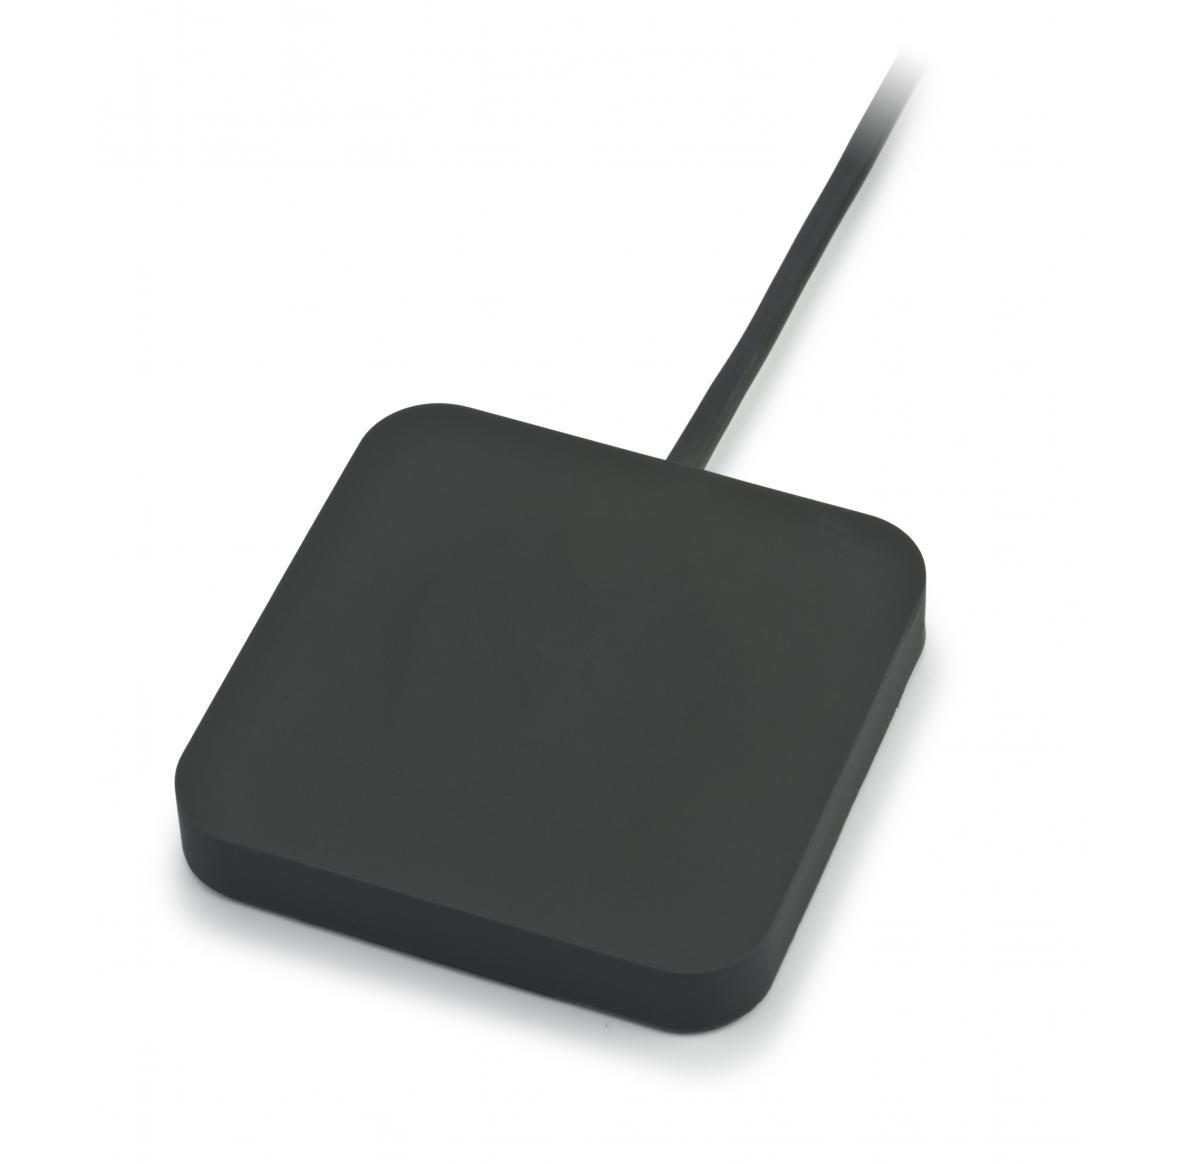 Wireless Charging Pad for Android Devices